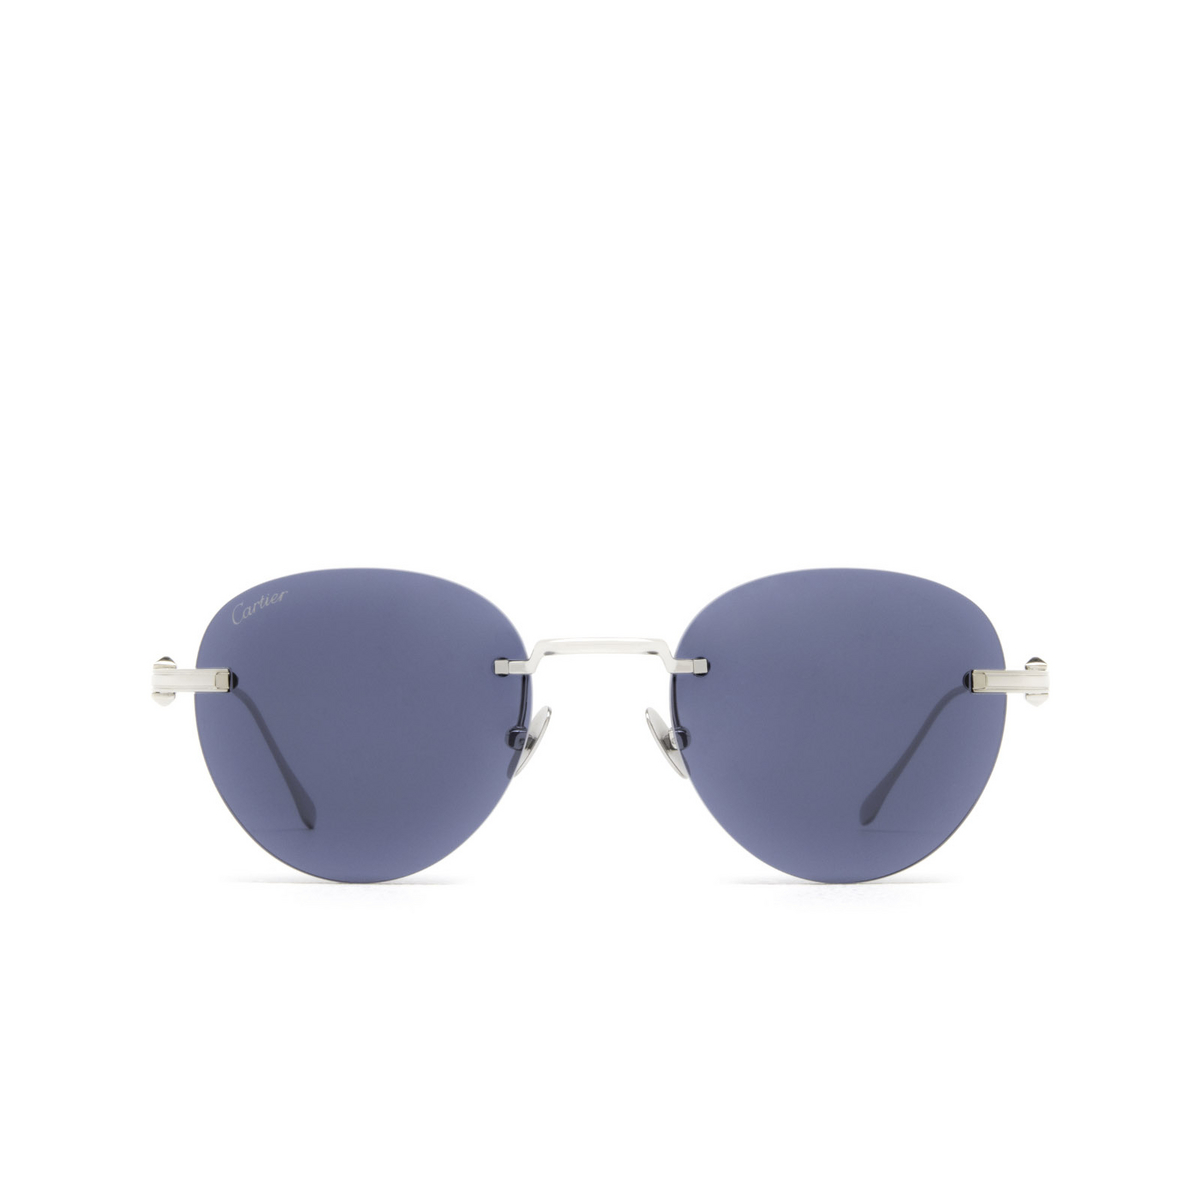 Cartier® Round Sunglasses: CT0331S color Silver 001 - front view.